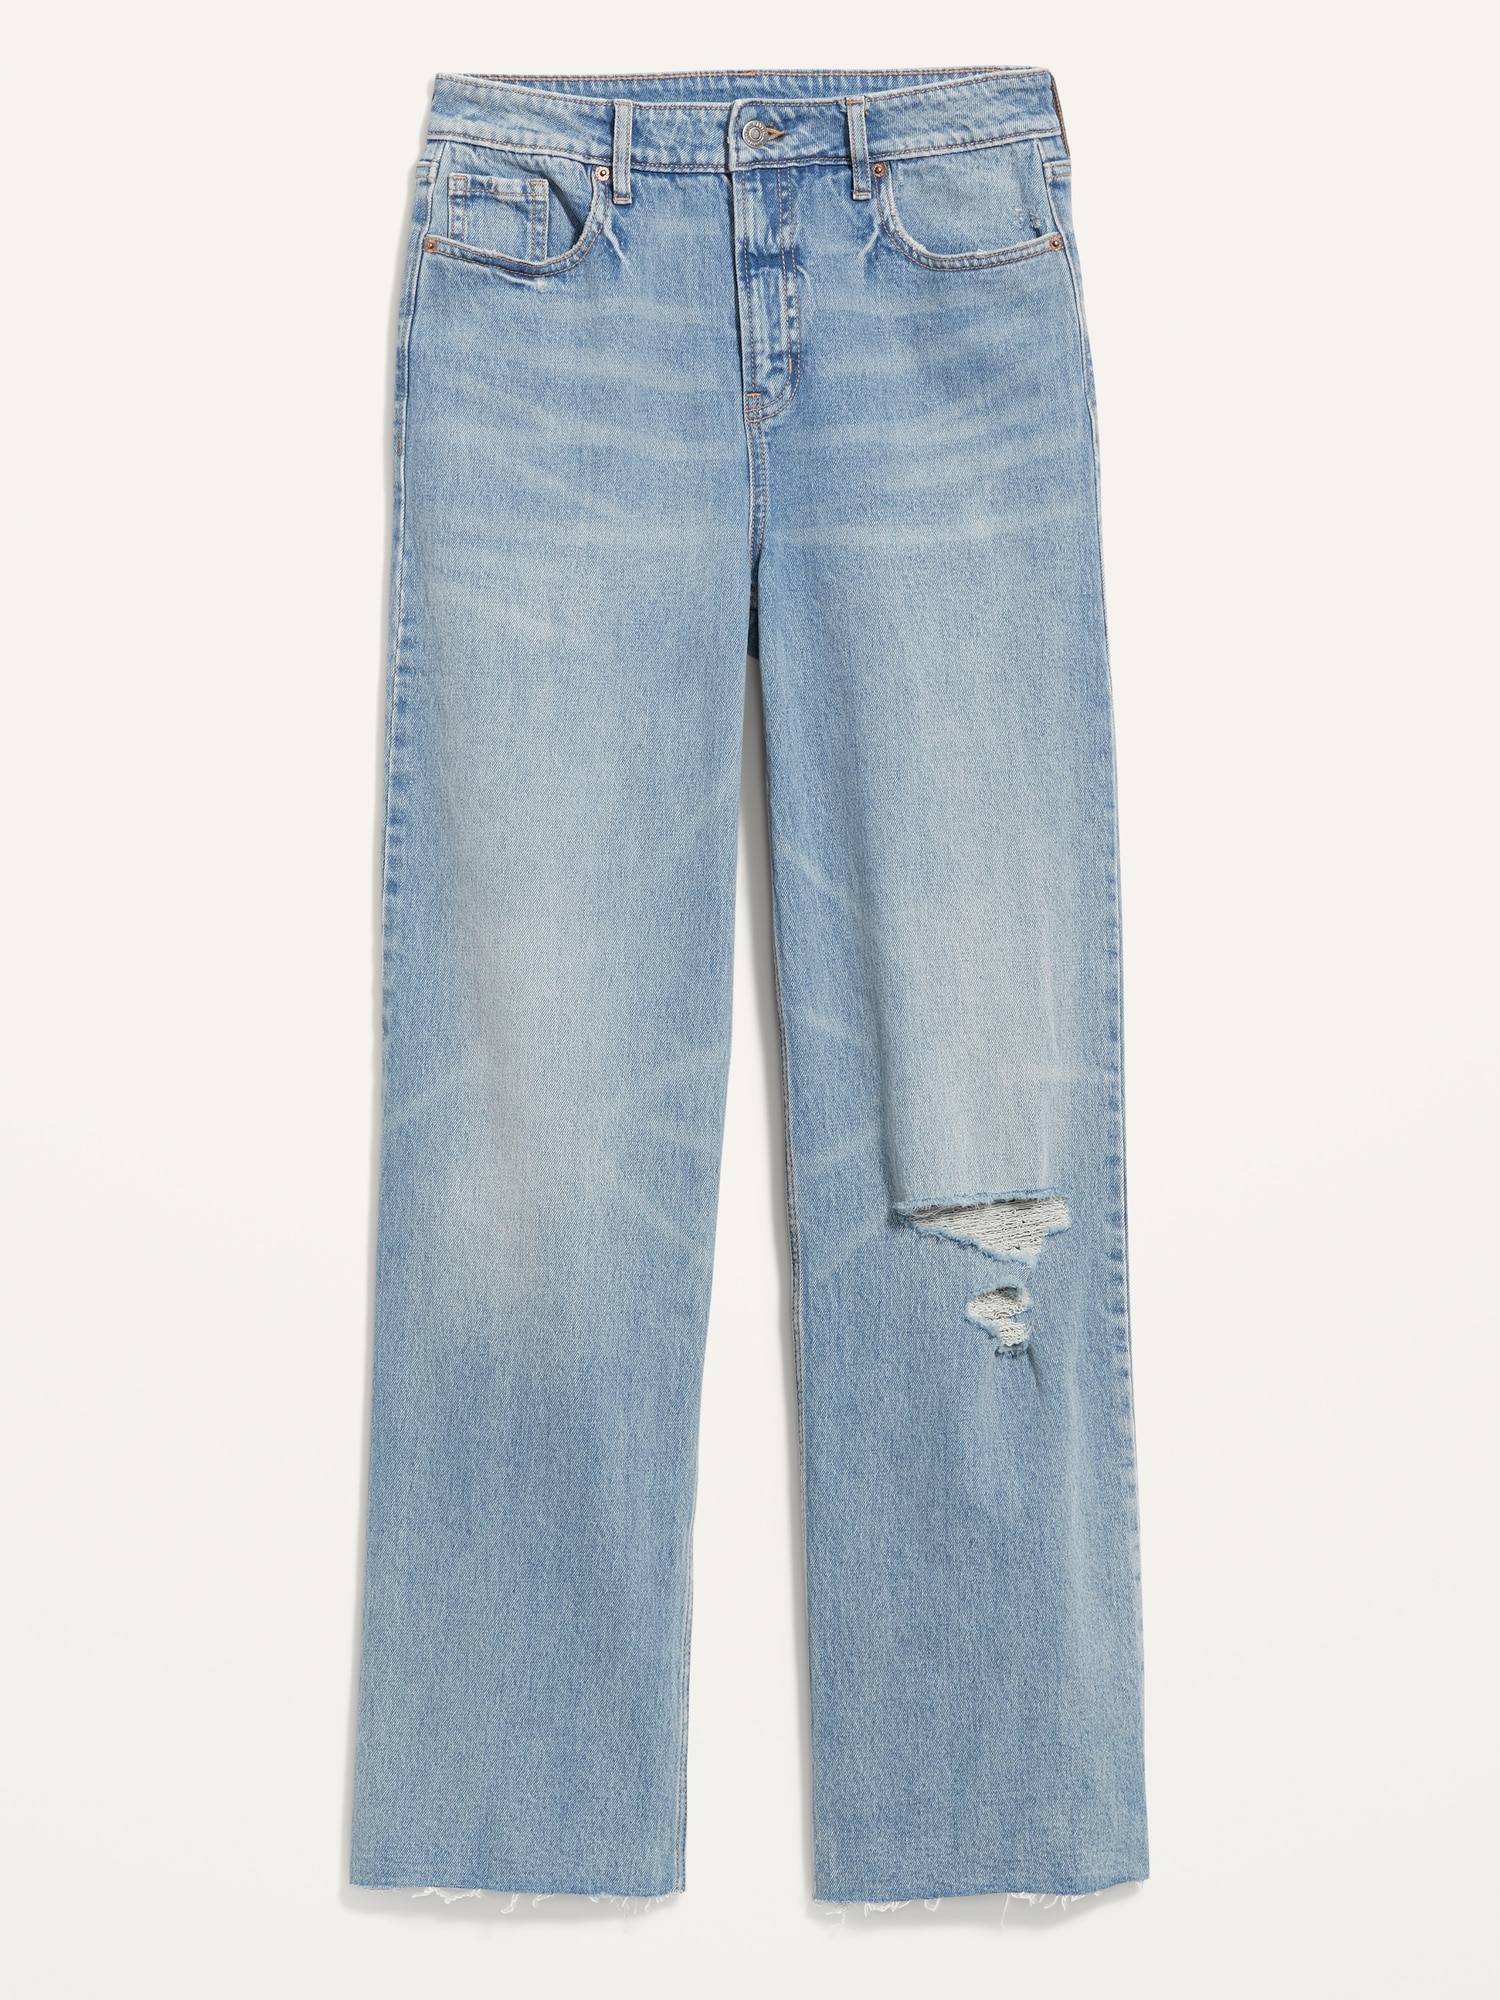 Extra High-Waisted Wide-Leg Ripped Jeans for Women